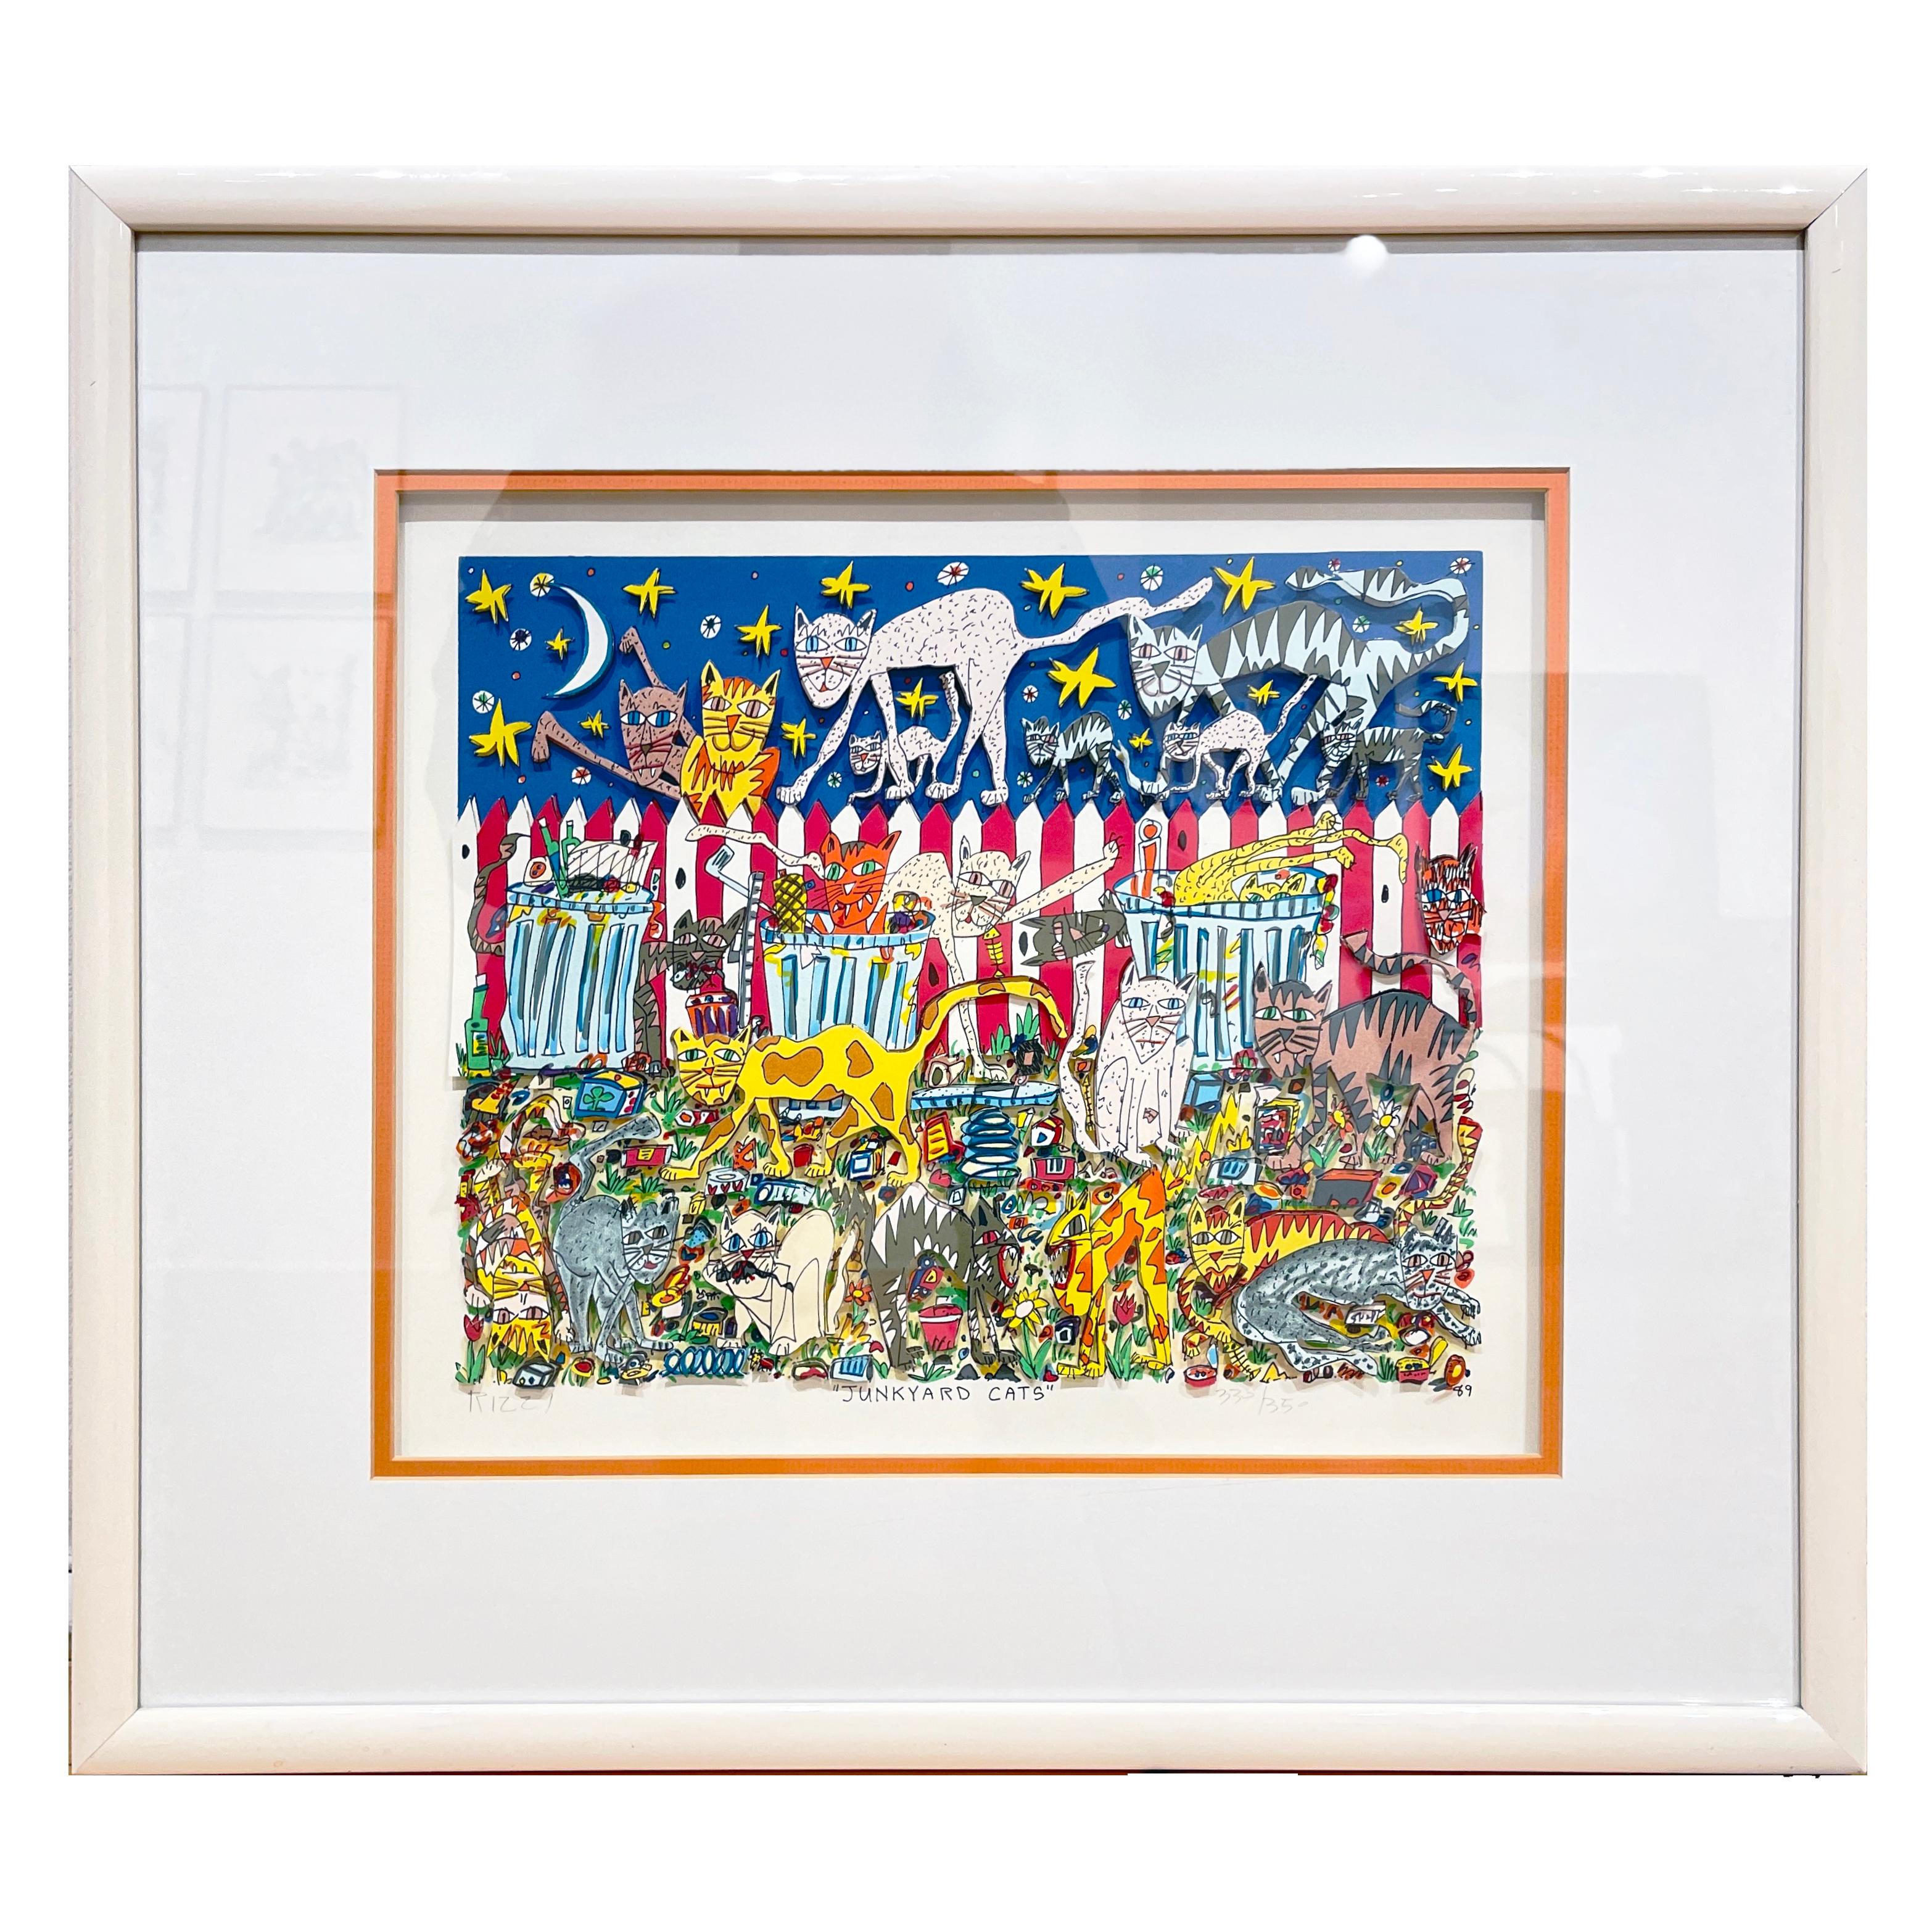 James Rizzi was an American Pop artist best known for his vibrant, youthful graphics and his three-dimensional prints. He was the official artist for the 1996 Olympic Games in Atlanta, adorning the famous logo with his noodle-like drawing style.